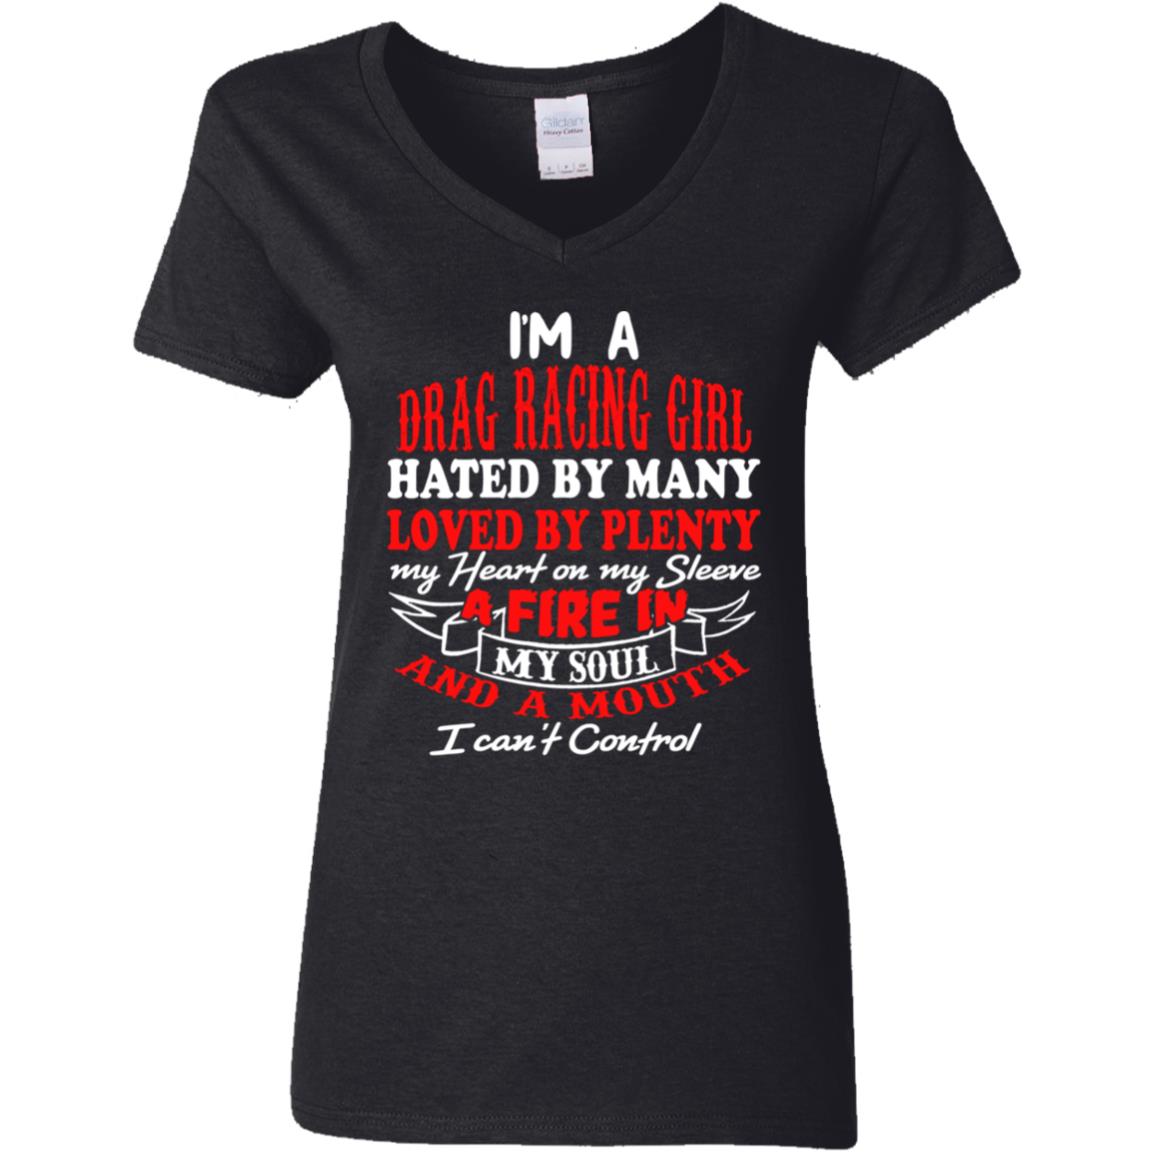 I'm A Drag Racing Girl Hated By Many Loved By Plenty Ladies' 5.3 oz. V-Neck T-Shirt